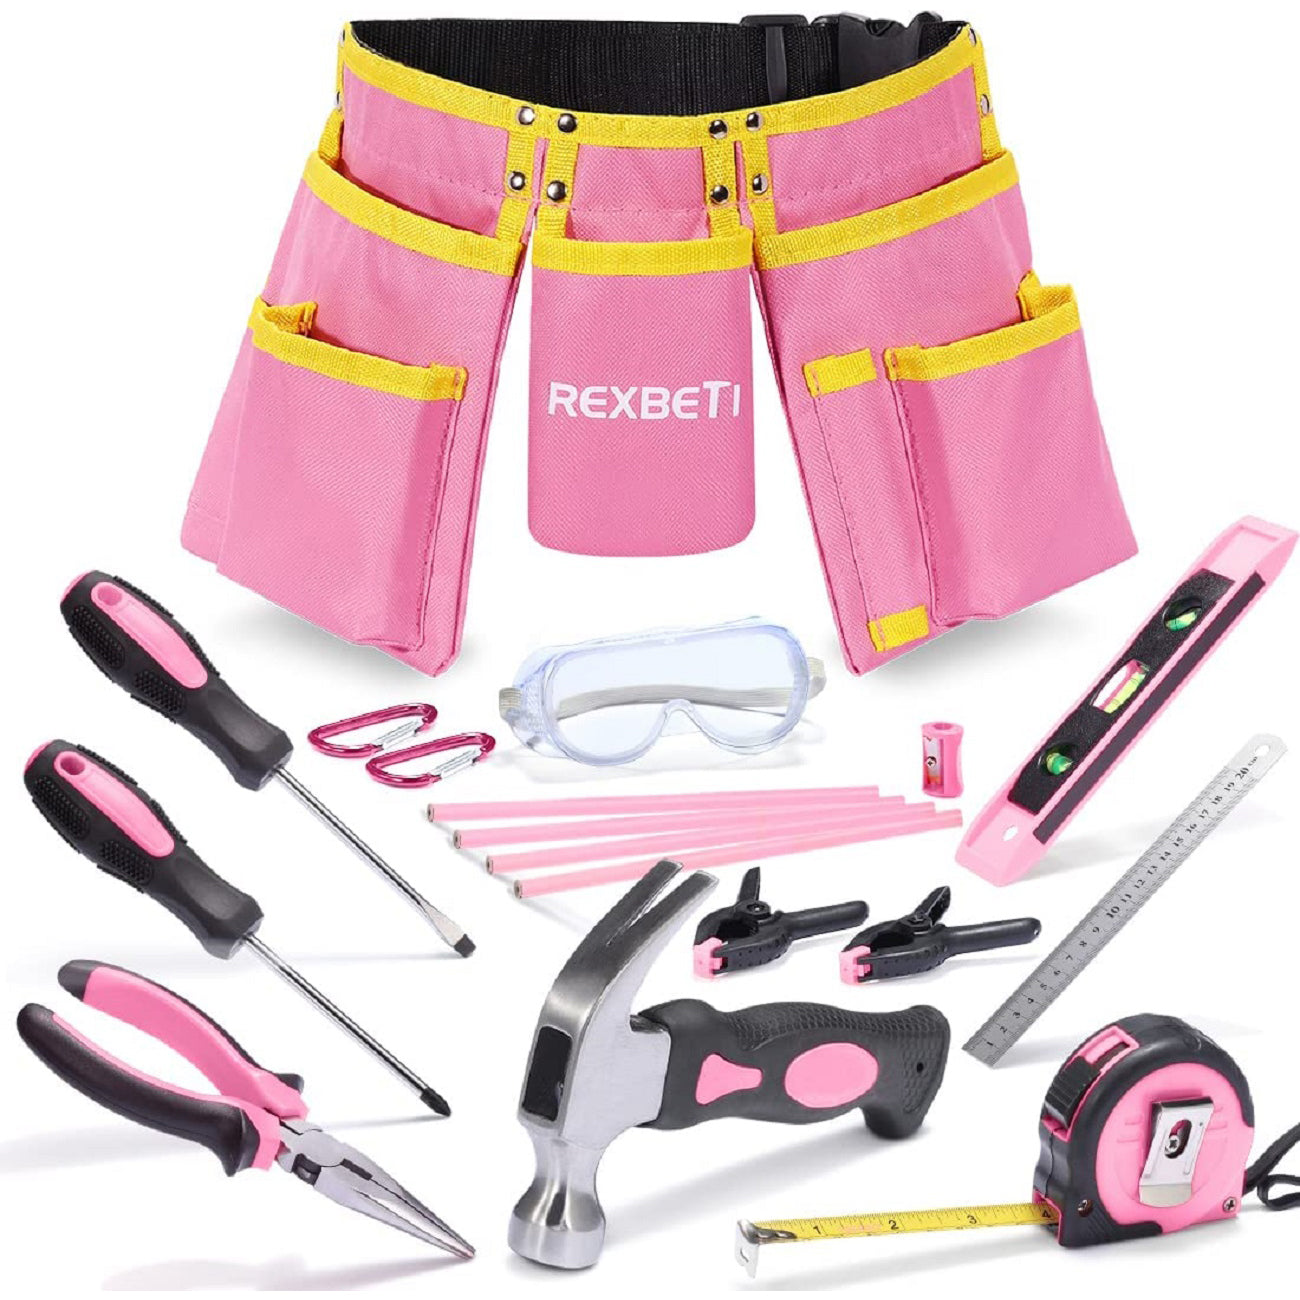 REXBETI 18pcs Pink Young Builder's Tool Set with Real Hand Tools, Rein